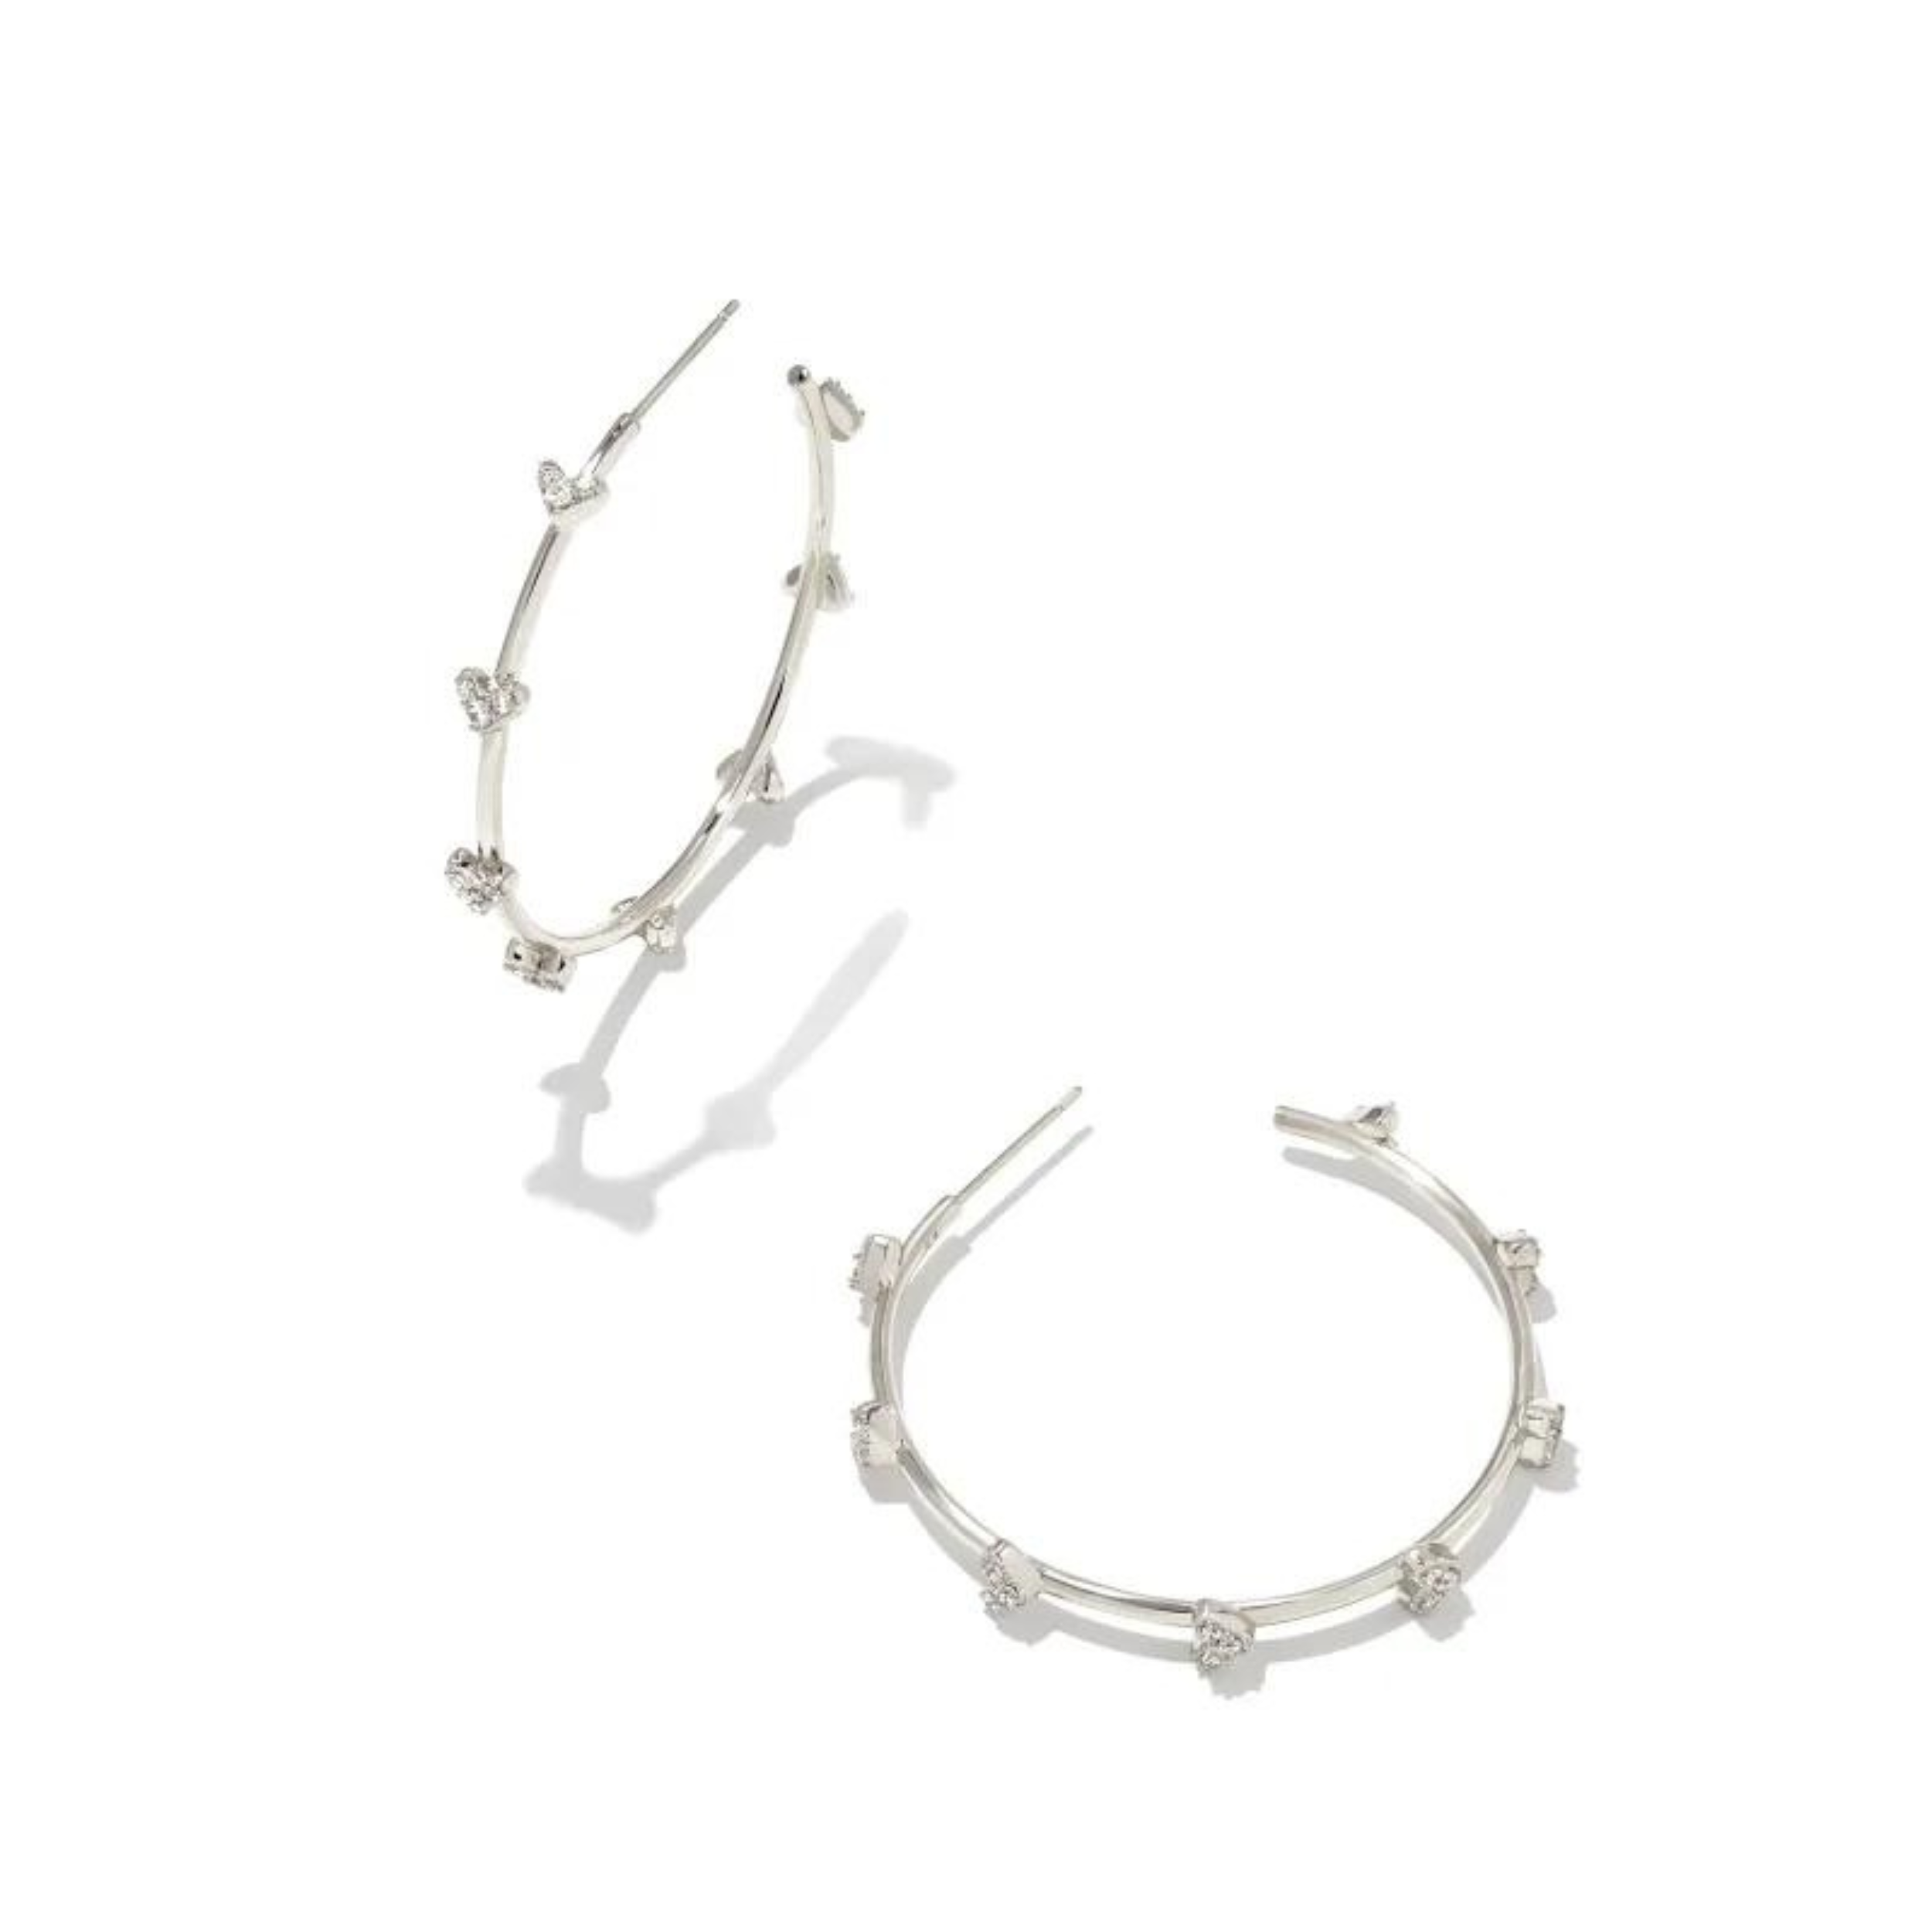 Silver hoop heart earrings with white crystals pictured on a white background.